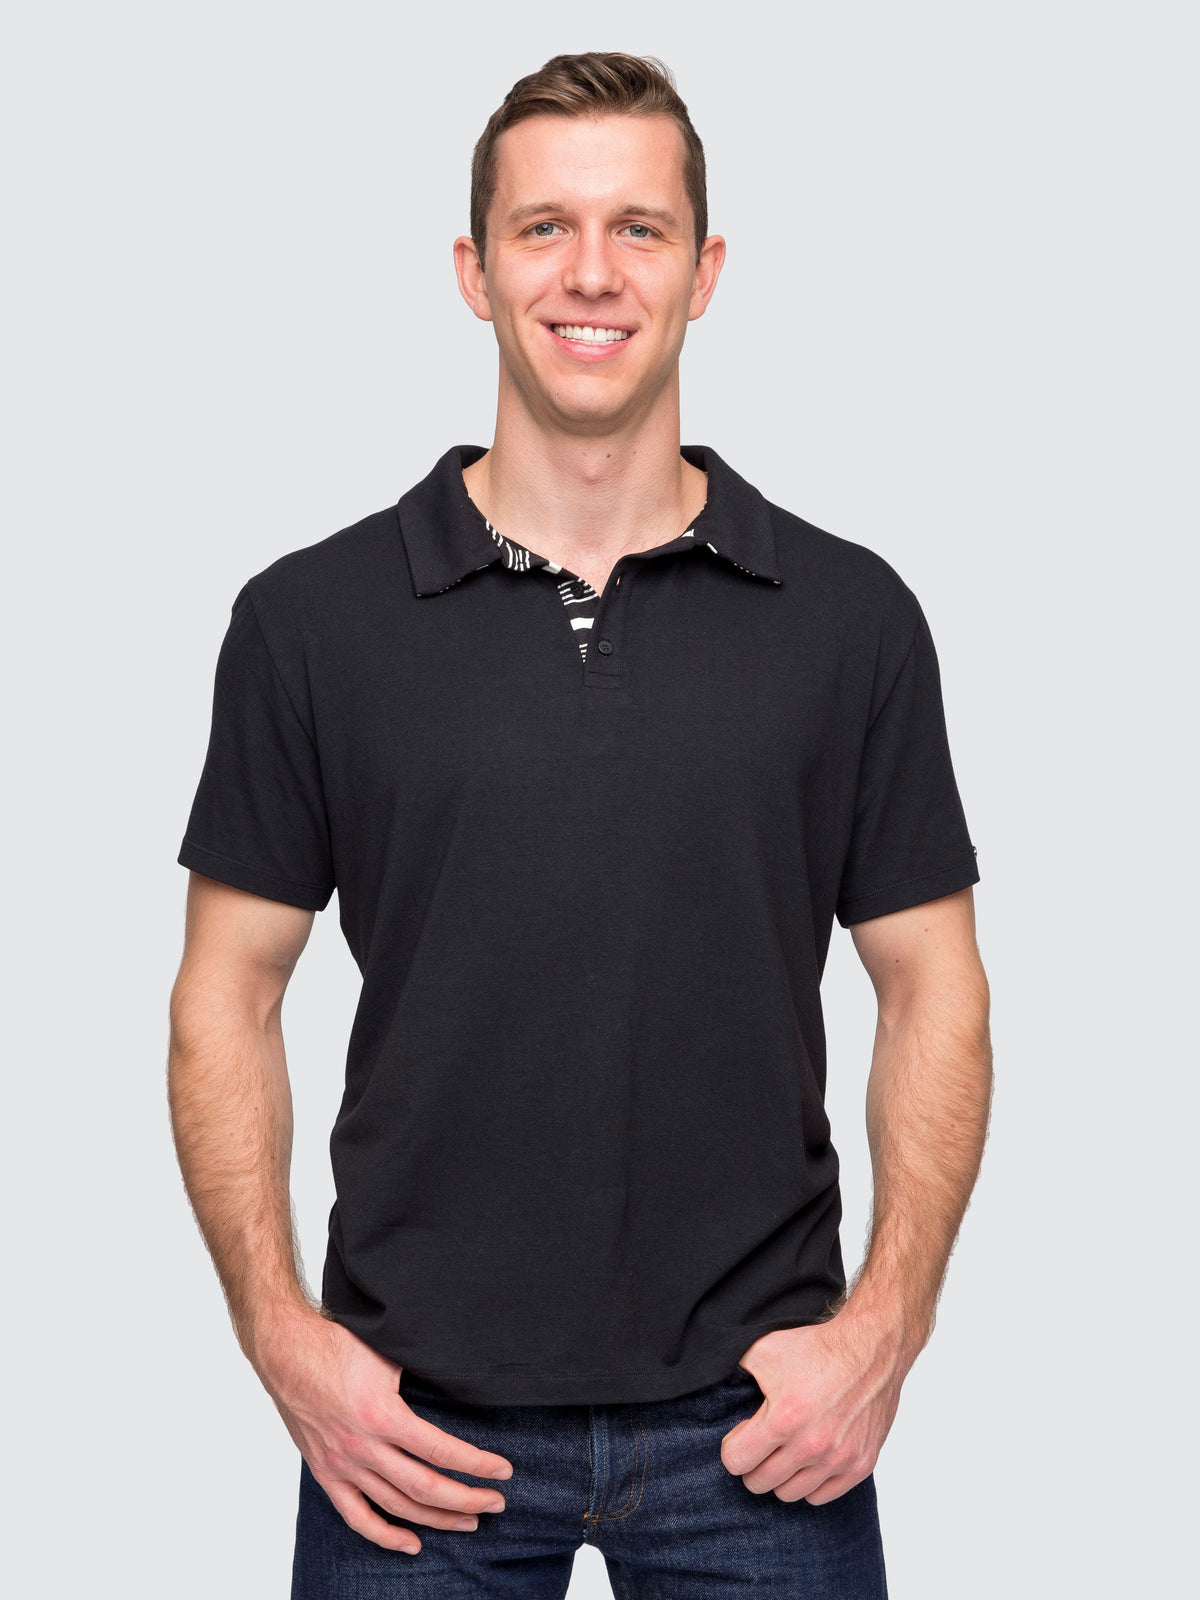 Two Blind Brothers - Mens Men's Short Sleeve Polo Charcoal